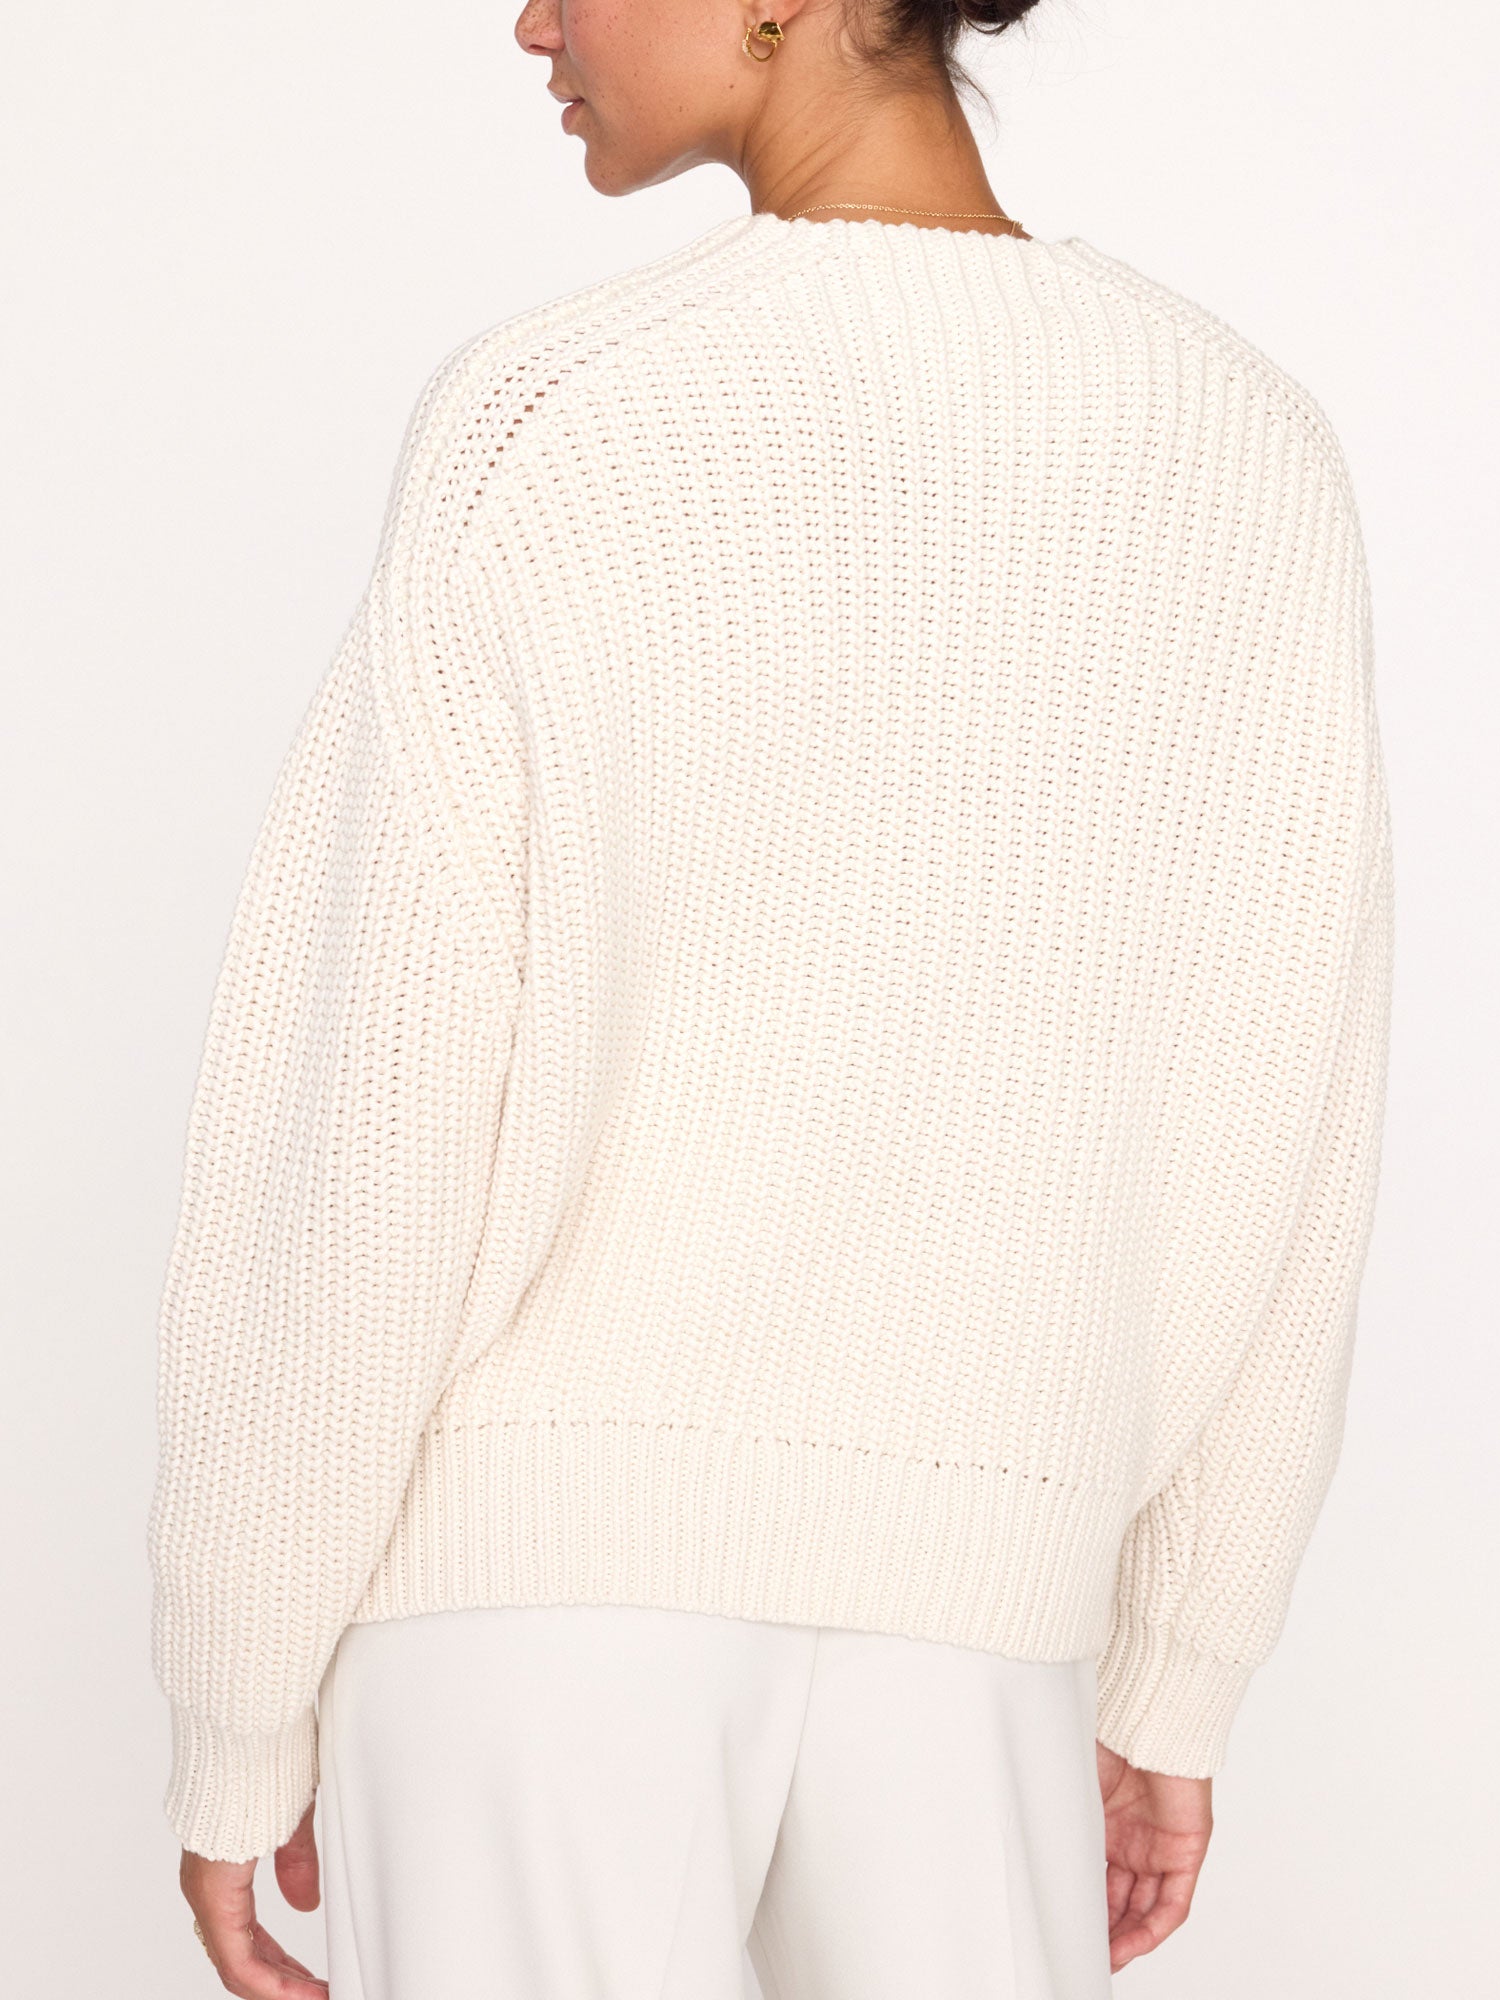 Beckett Pullover off-white sweater back view